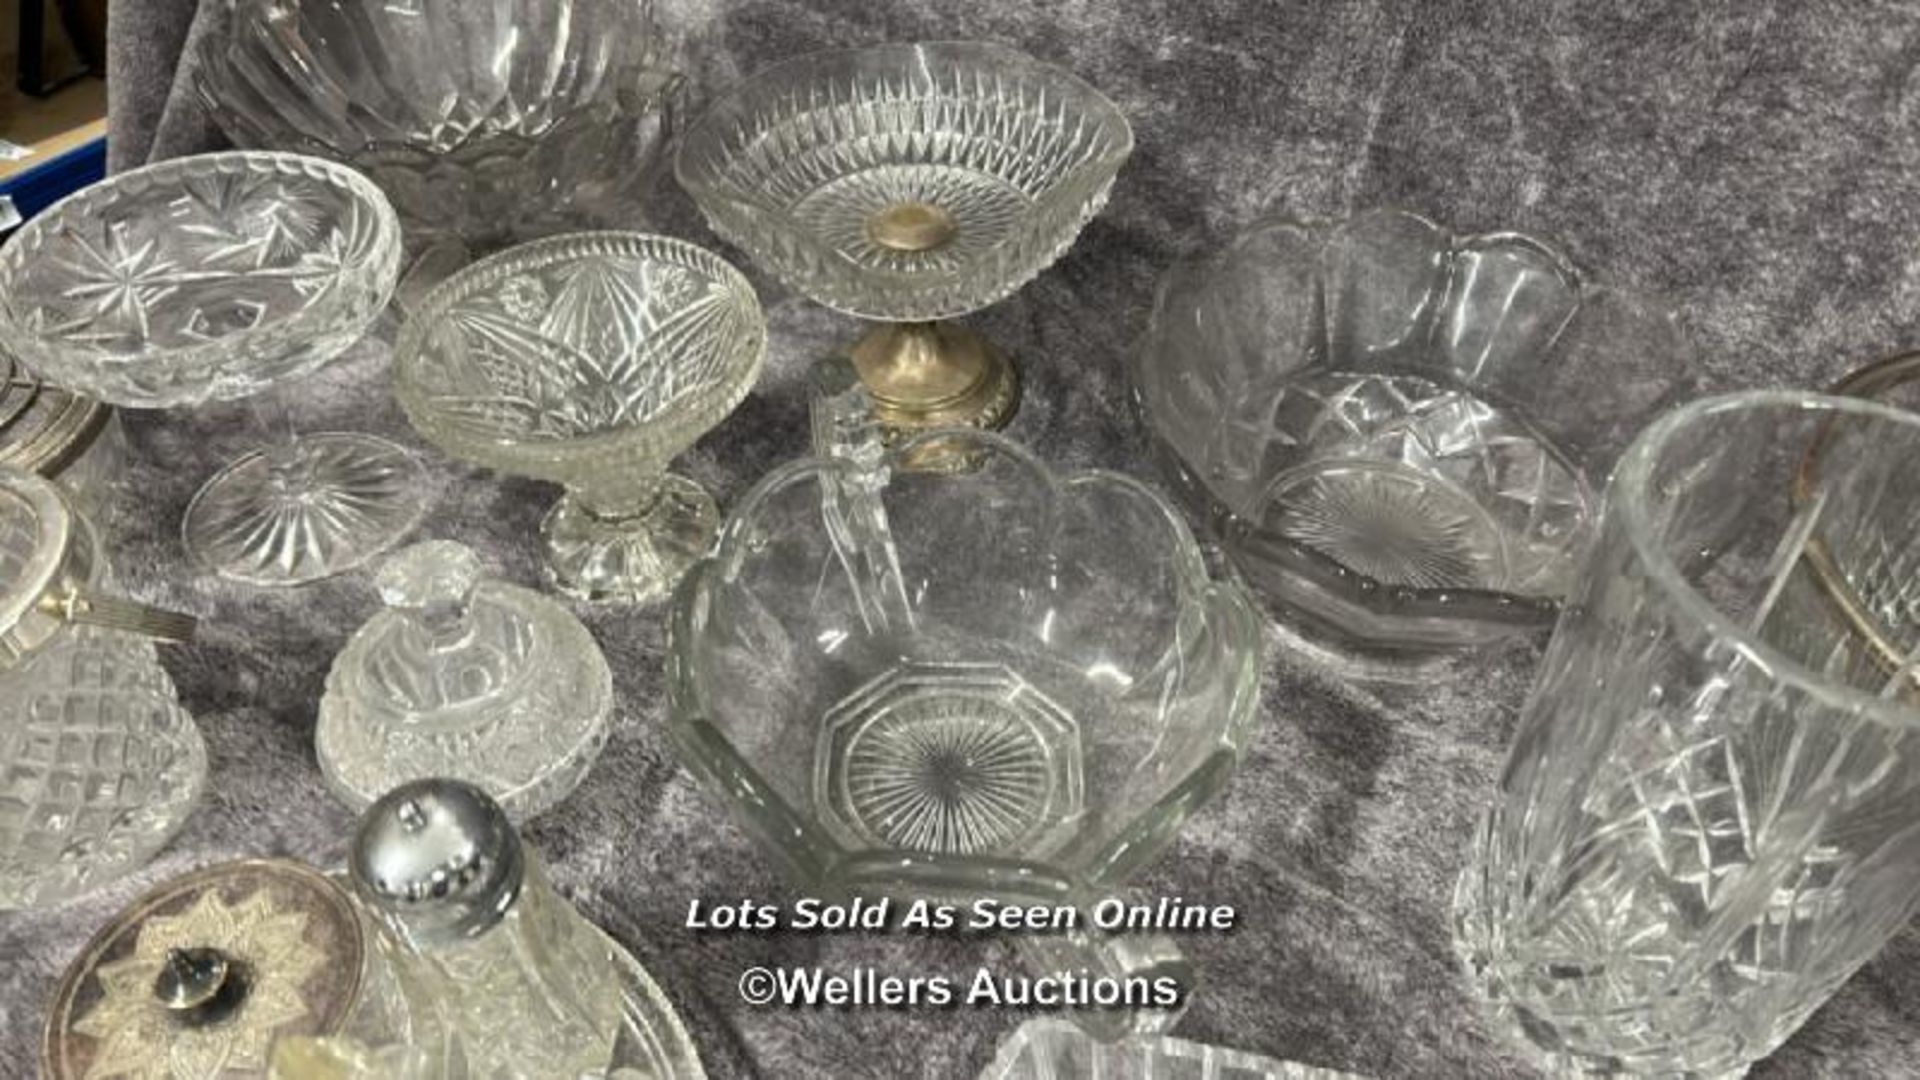 A large collection of glassware including decanters, bowls, vase, rose bowl and cheese dish / AN11 - Image 7 of 7